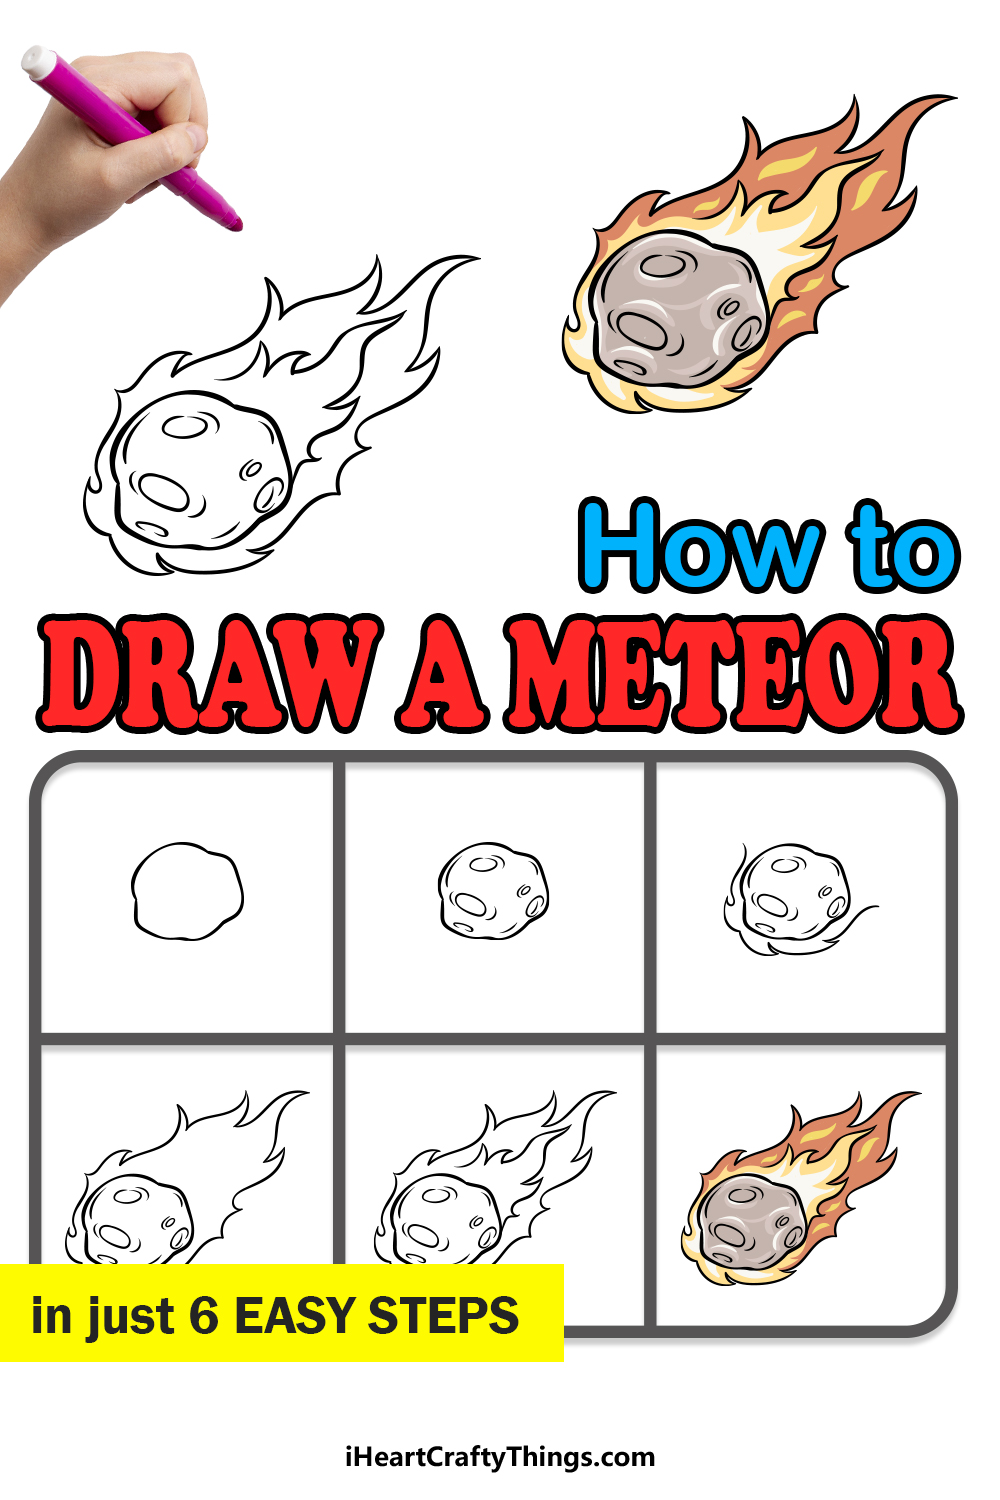 how to draw a Meteor in 6 easy steps